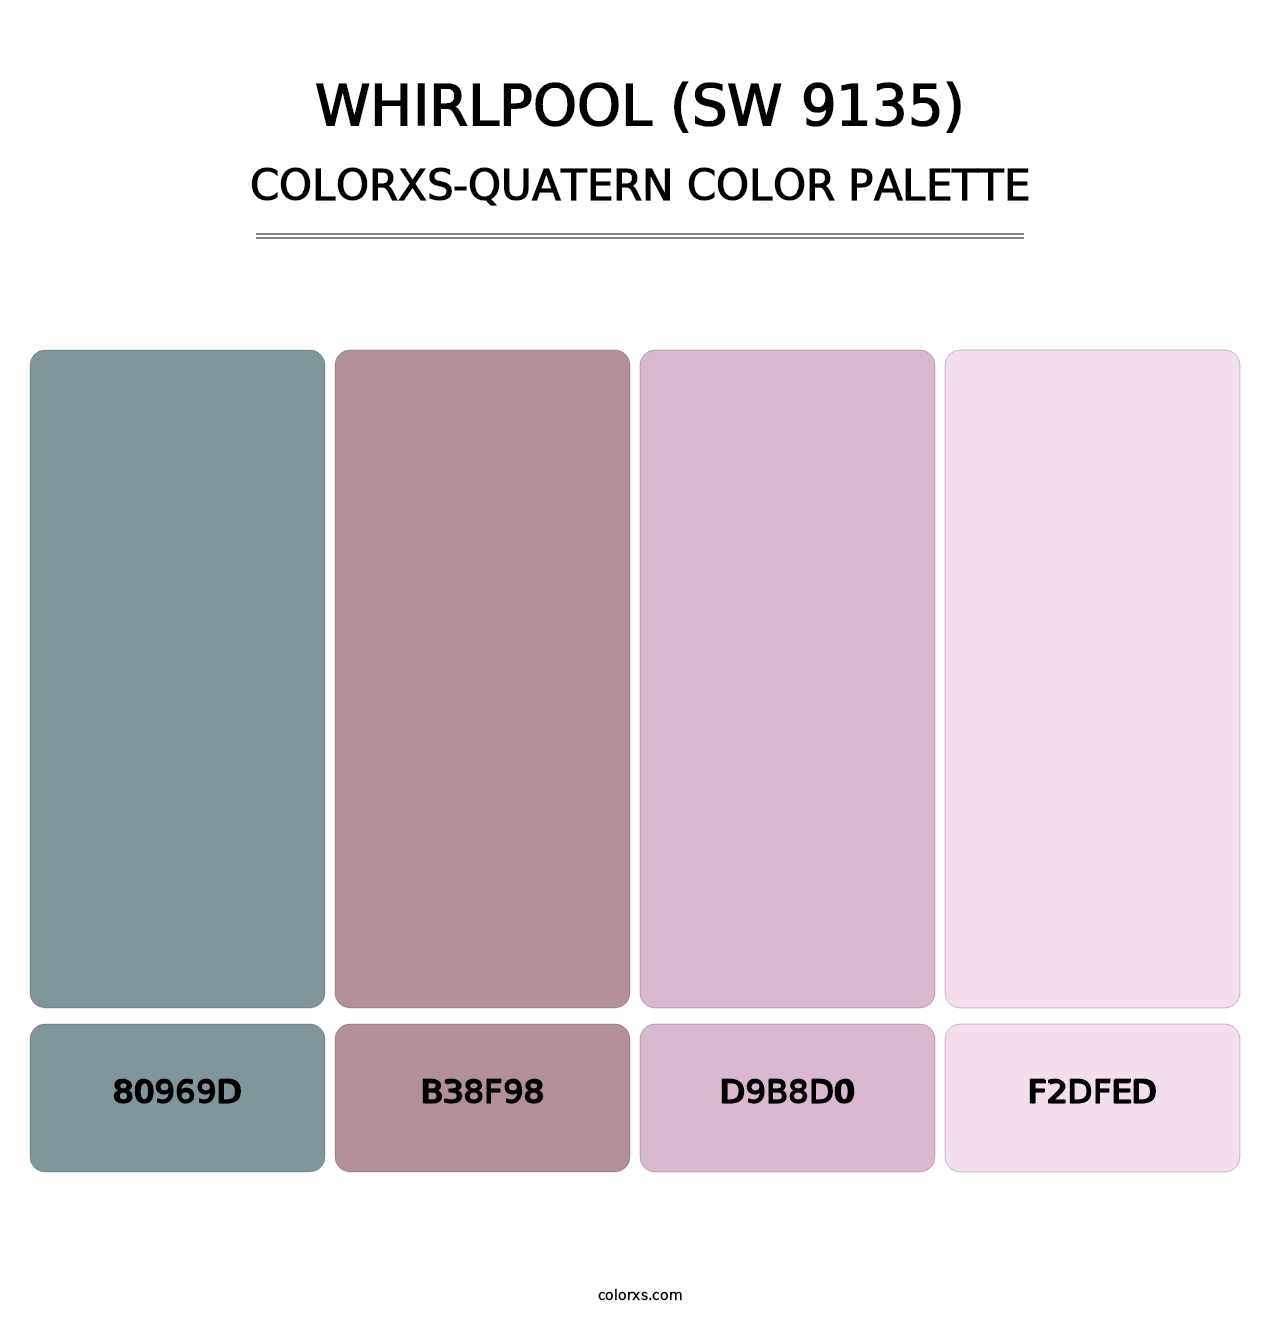 Whirlpool (SW 9135) - Colorxs Quatern Palette